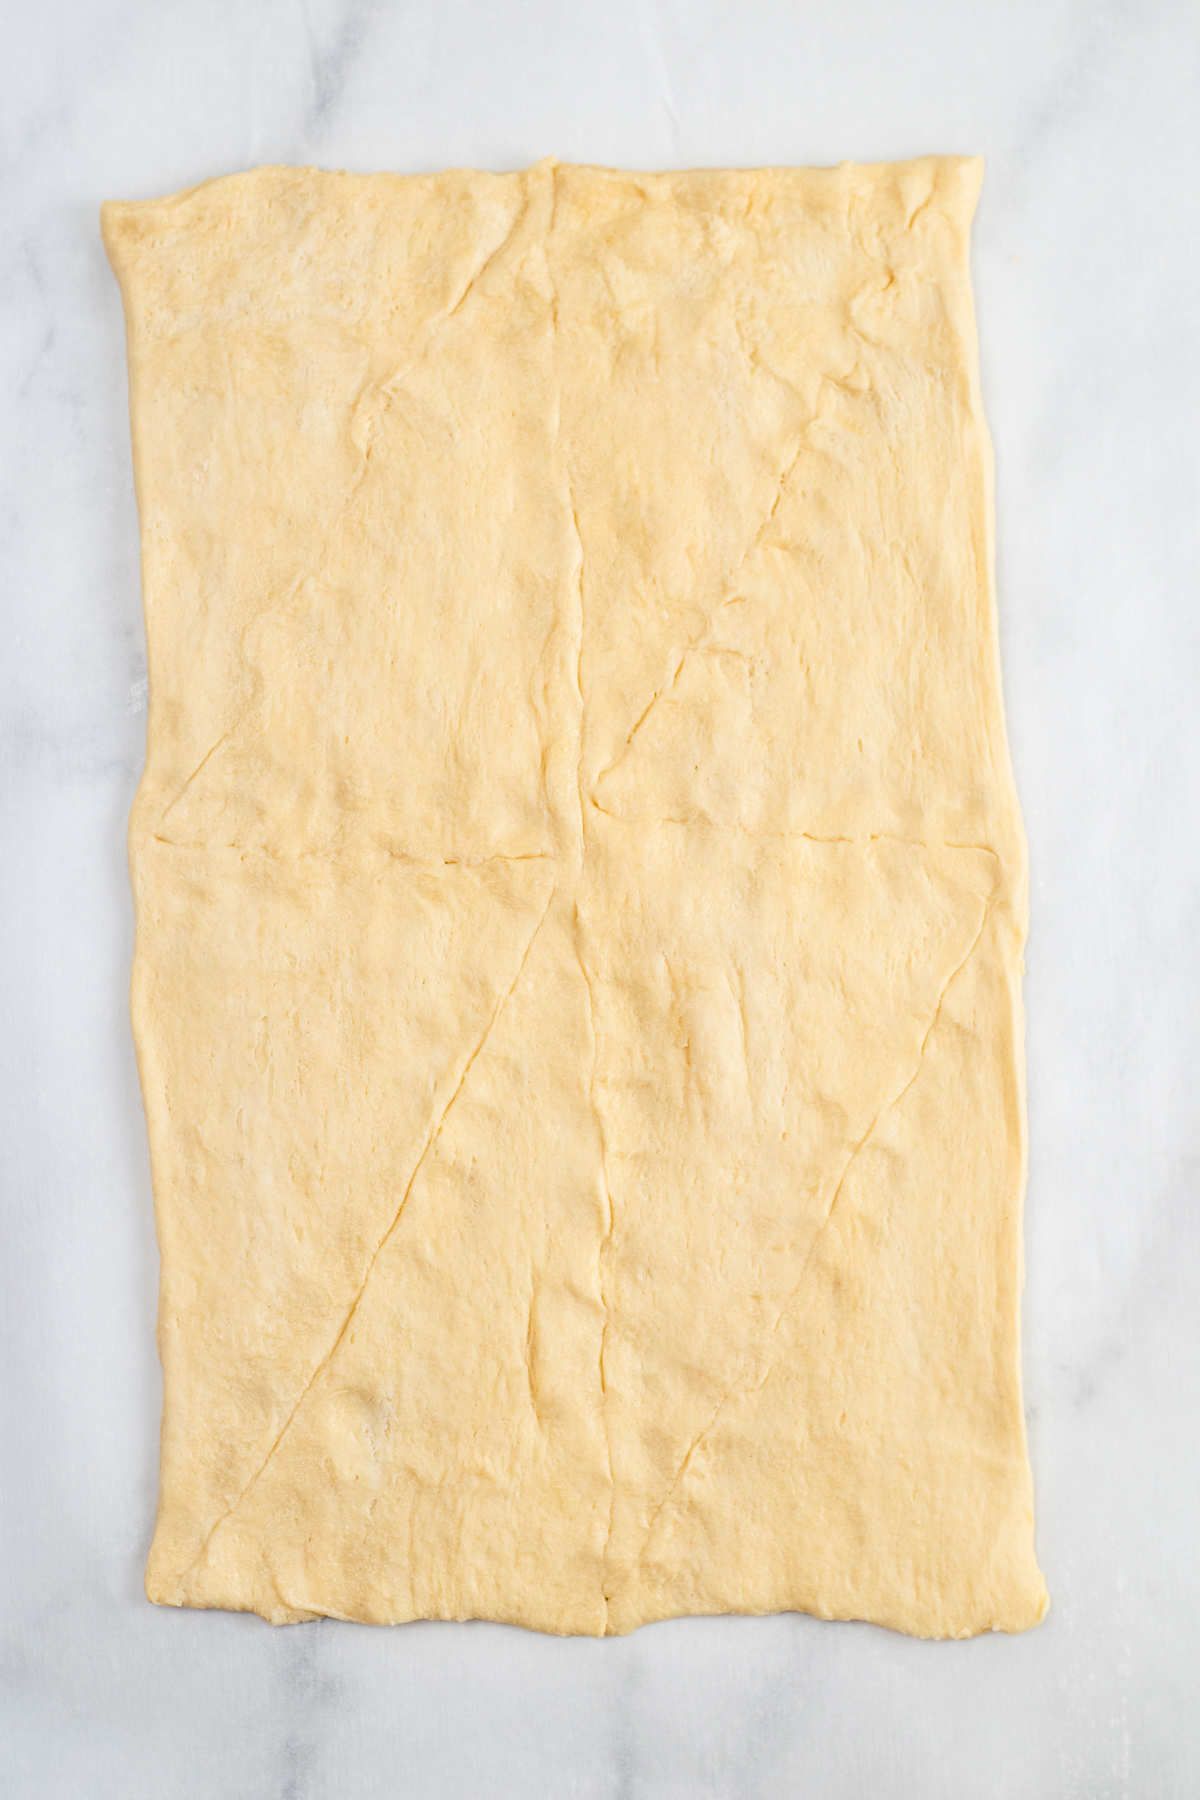 Crescent roll dough rolled out into a sheet with the seams pressed closed on a counter from above.